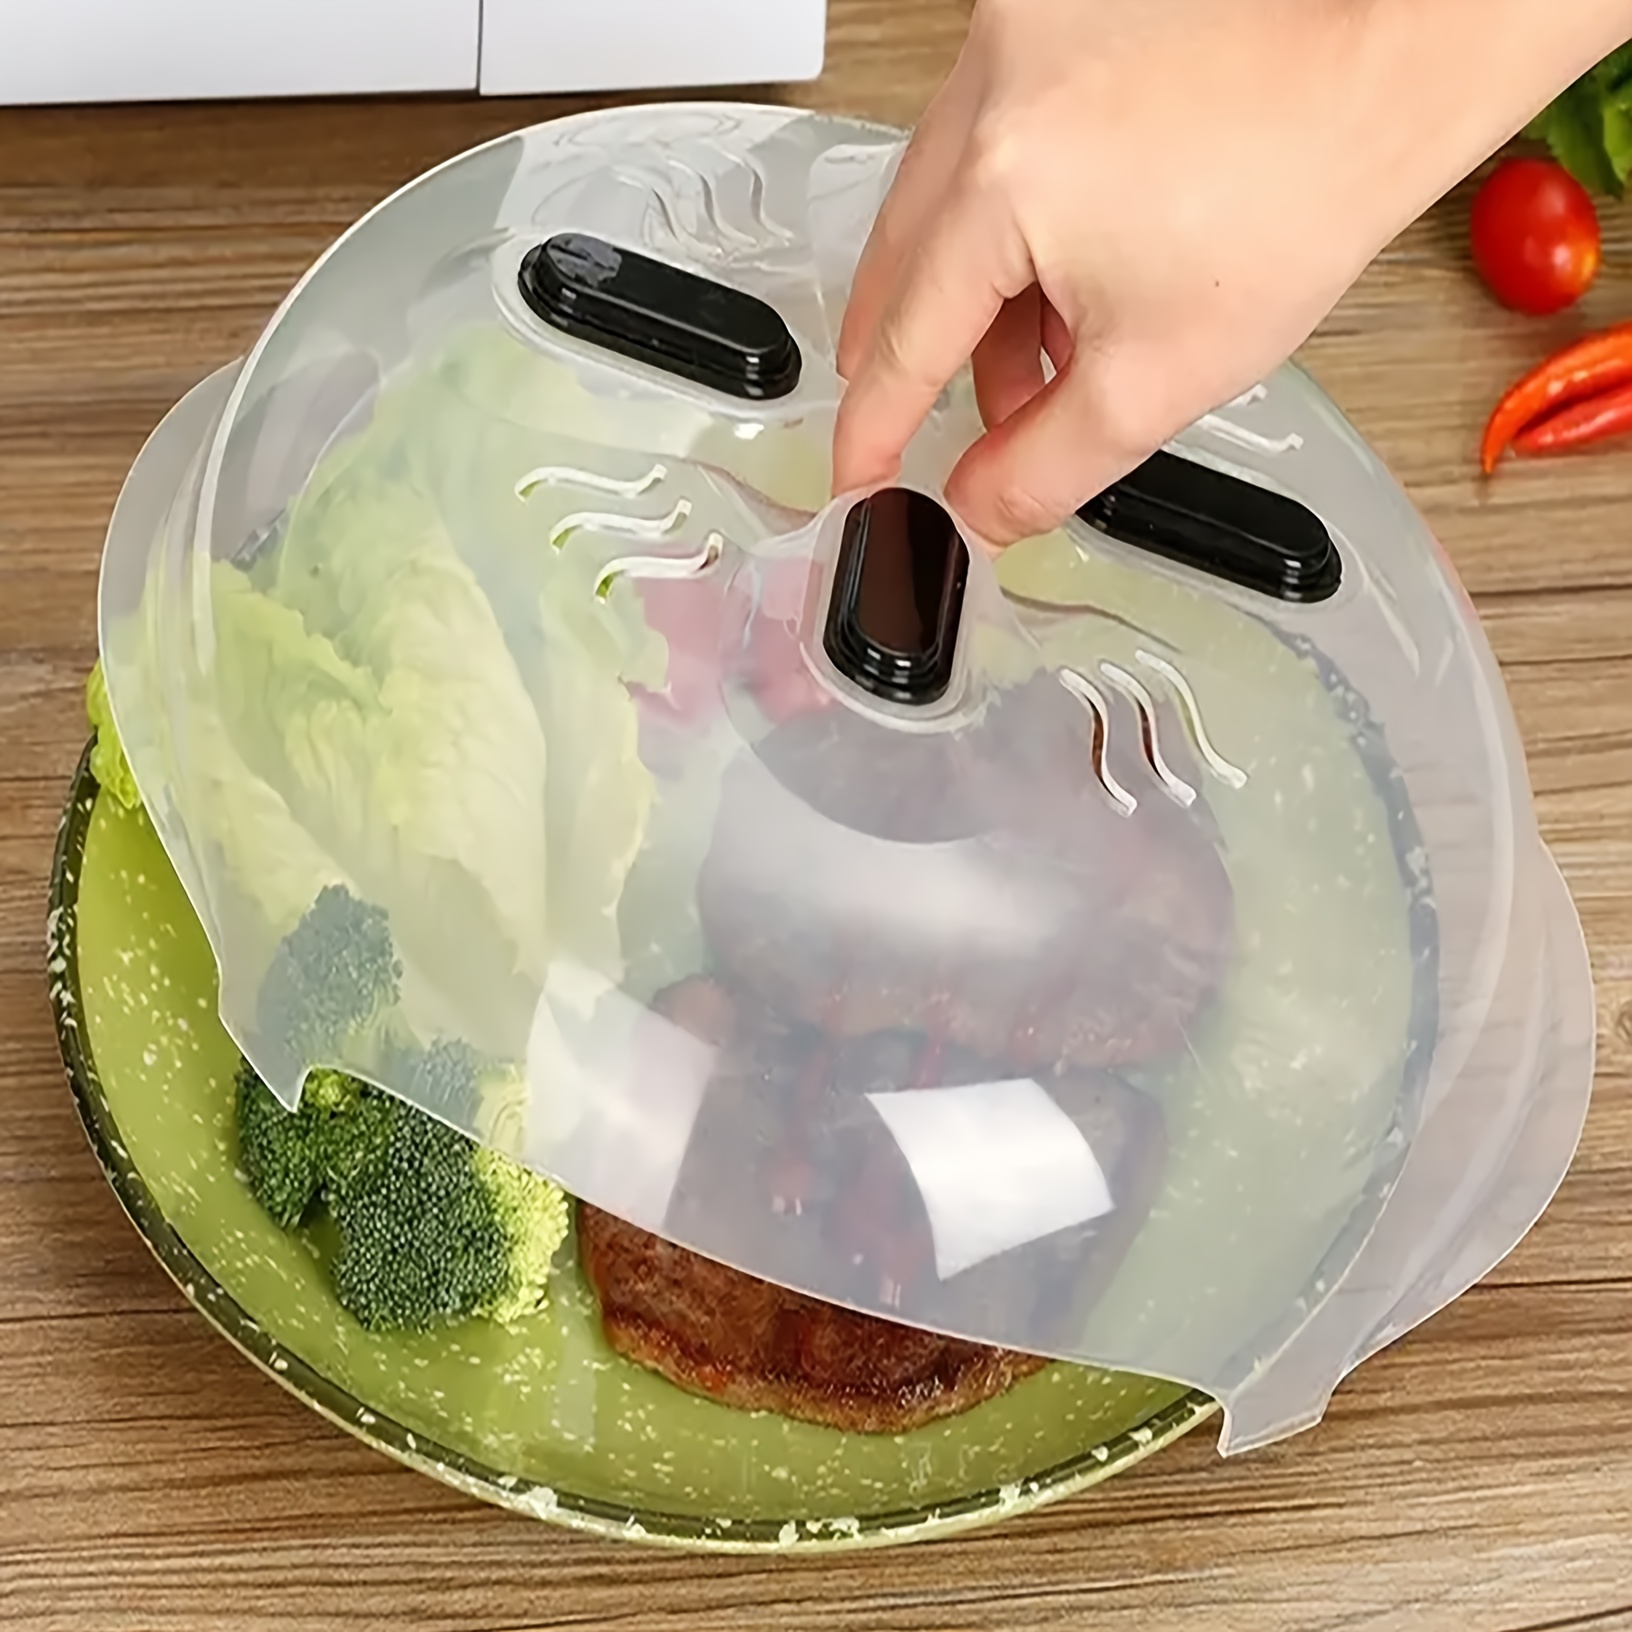 Clear Magnetic Microwave Cover With Steam Vents - Anti-splatter